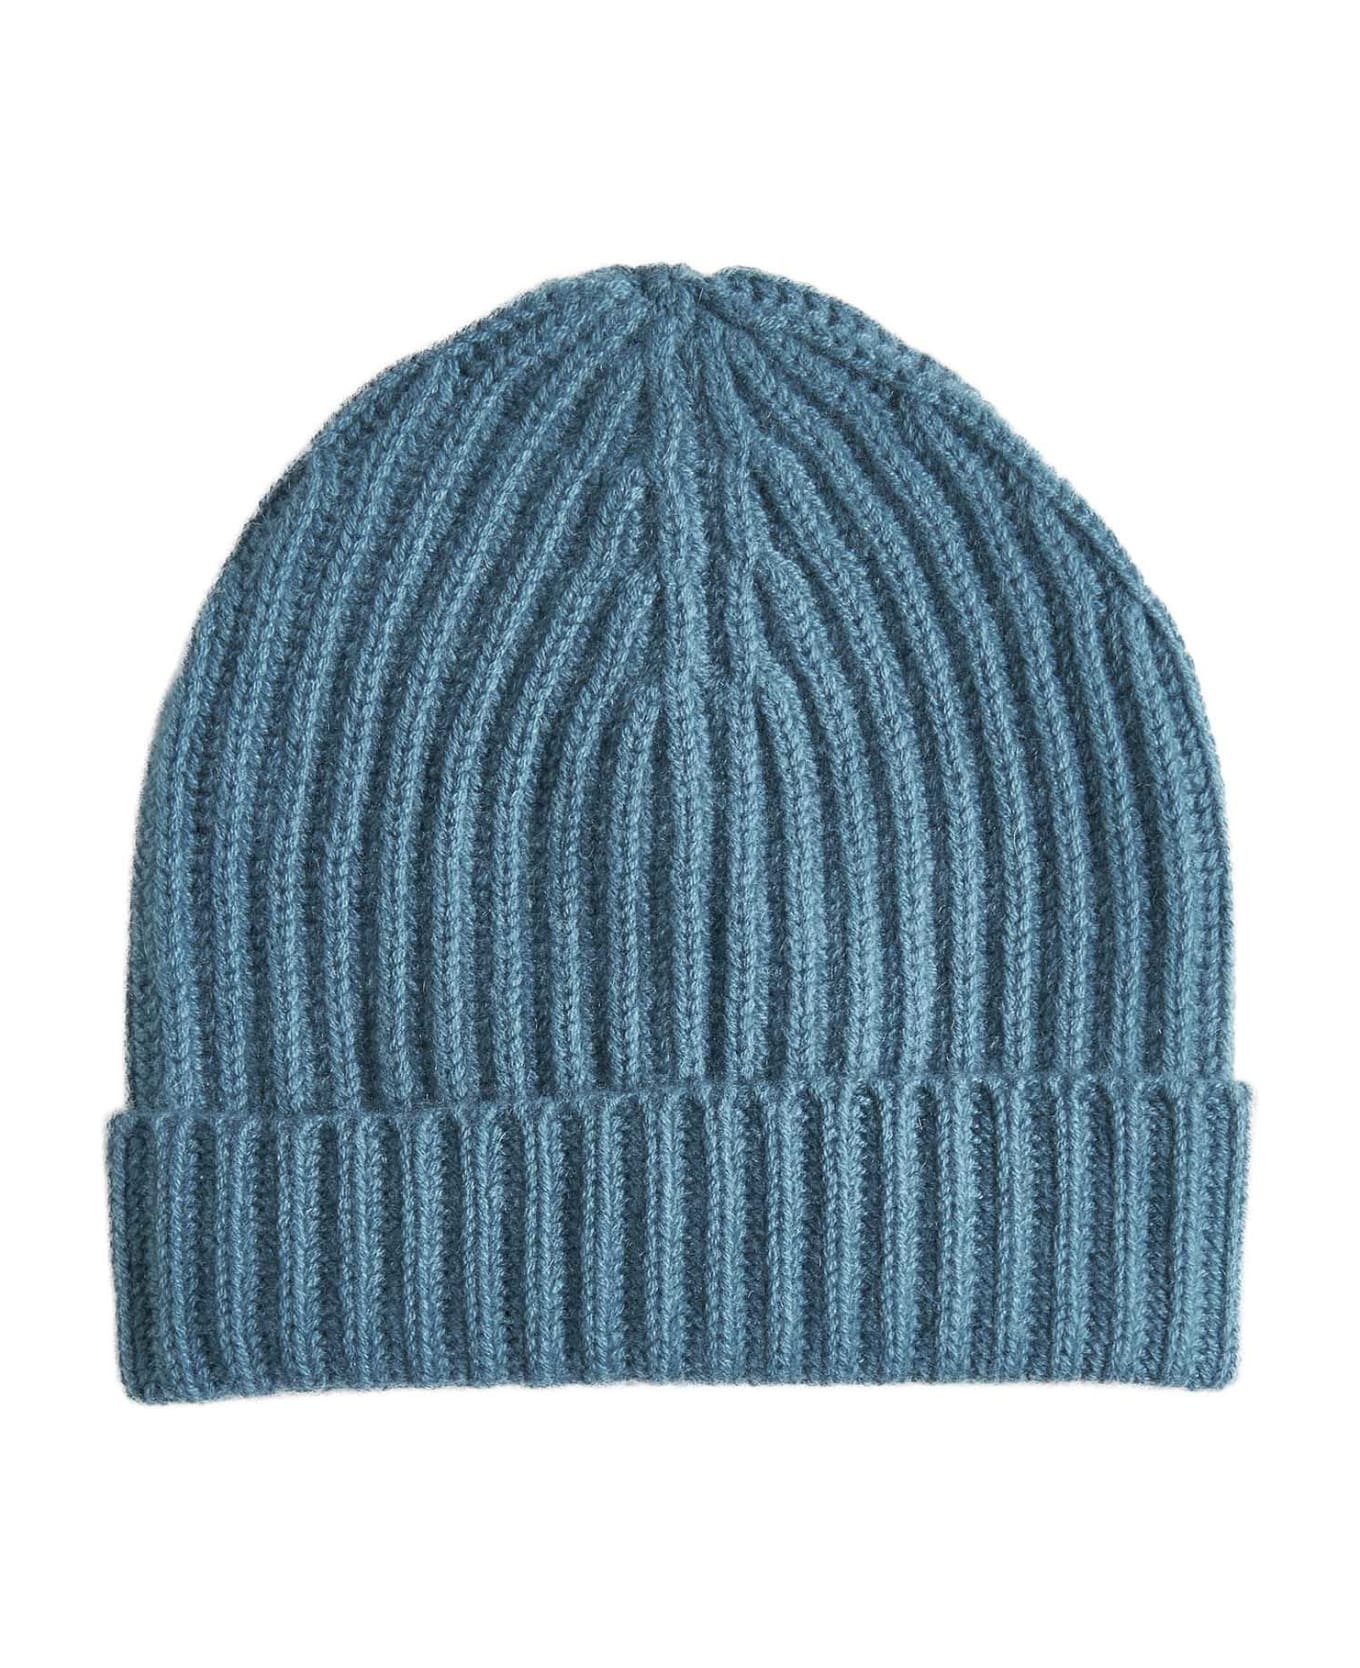 Malo Hat - Teal green